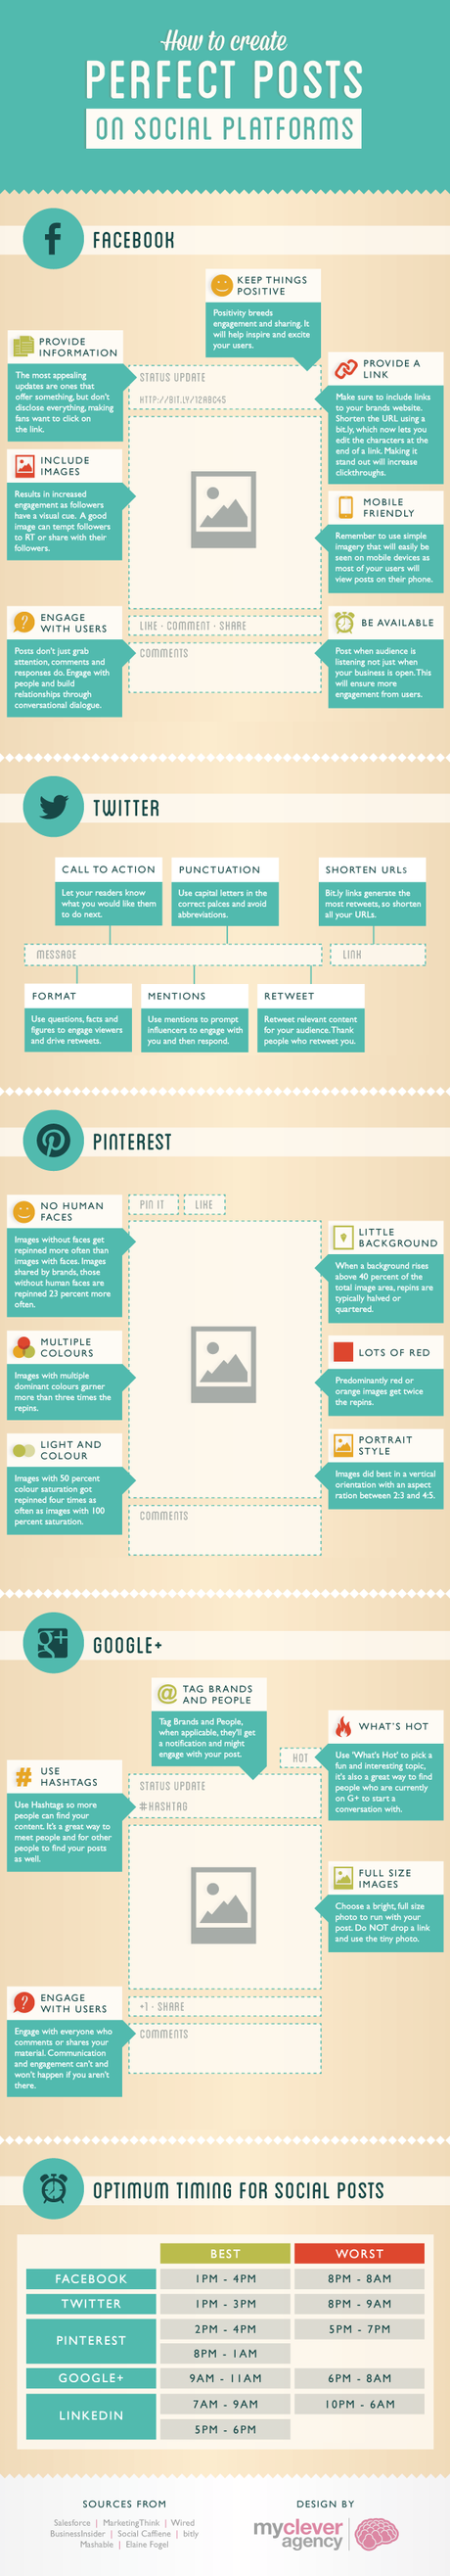 mycleveragency Social Media Perfect Post Infographic